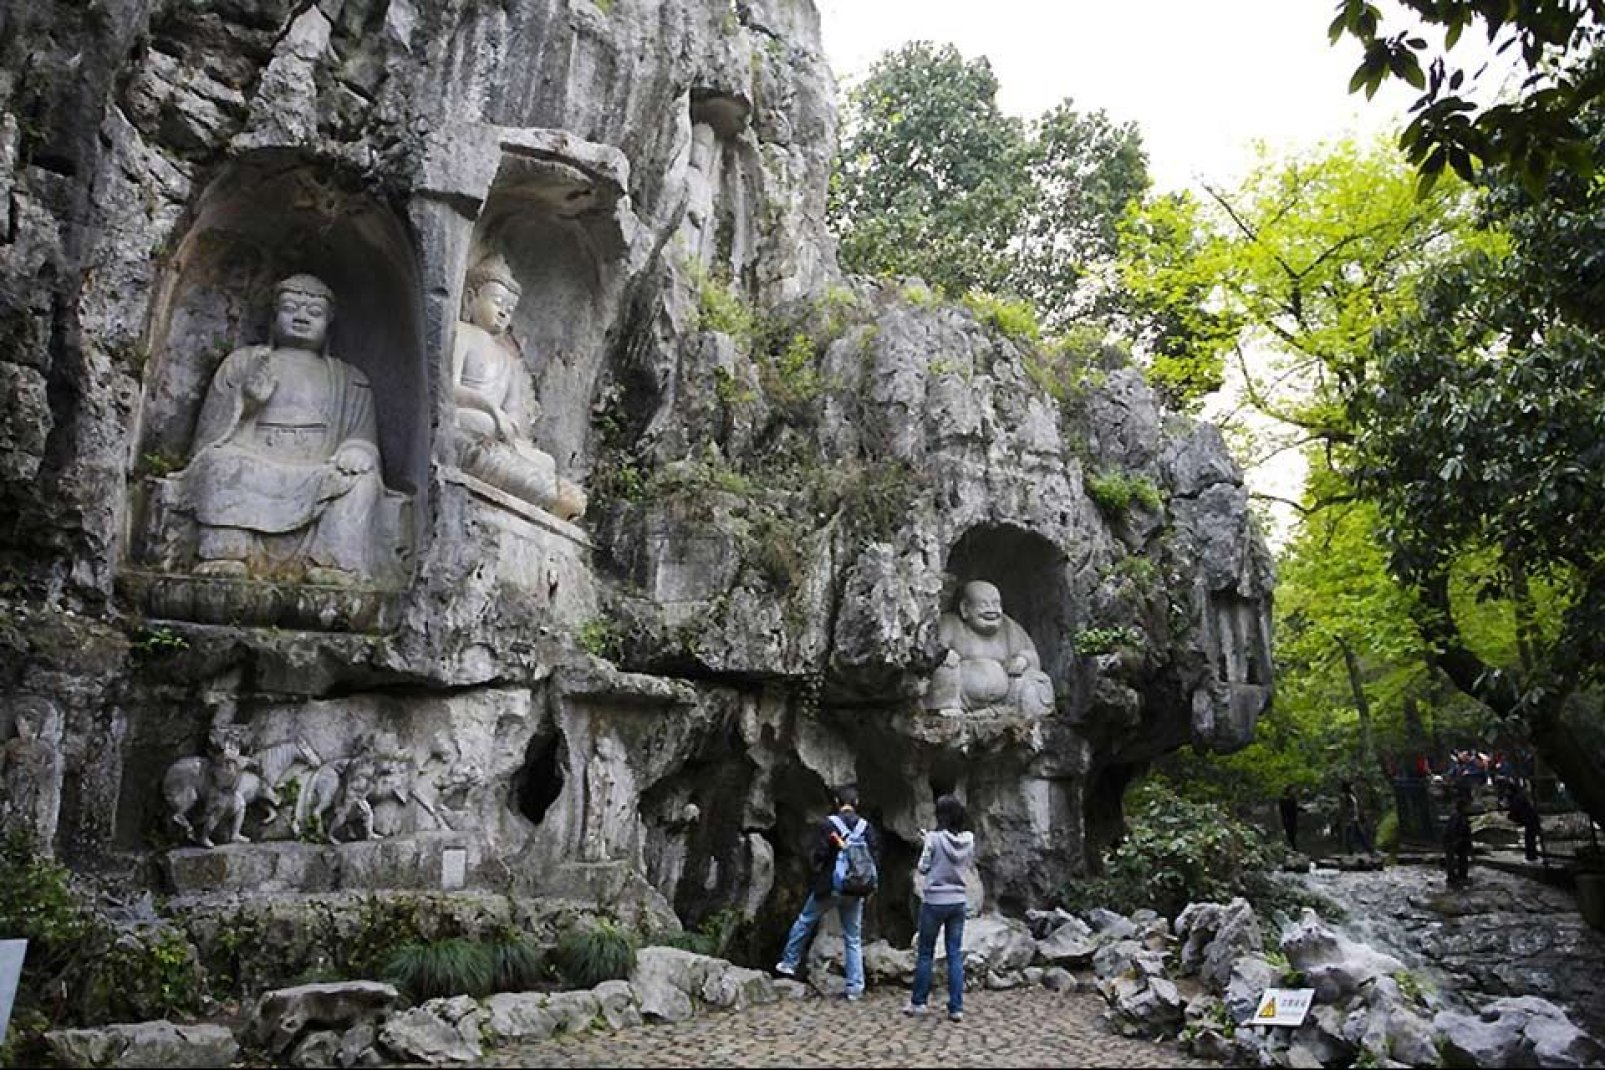 On the hill above the Lingyin Temple in Hangzhou, 388 statues of Buddha Bodhisattva were carved into the stone between the 10th and 14th centuries.